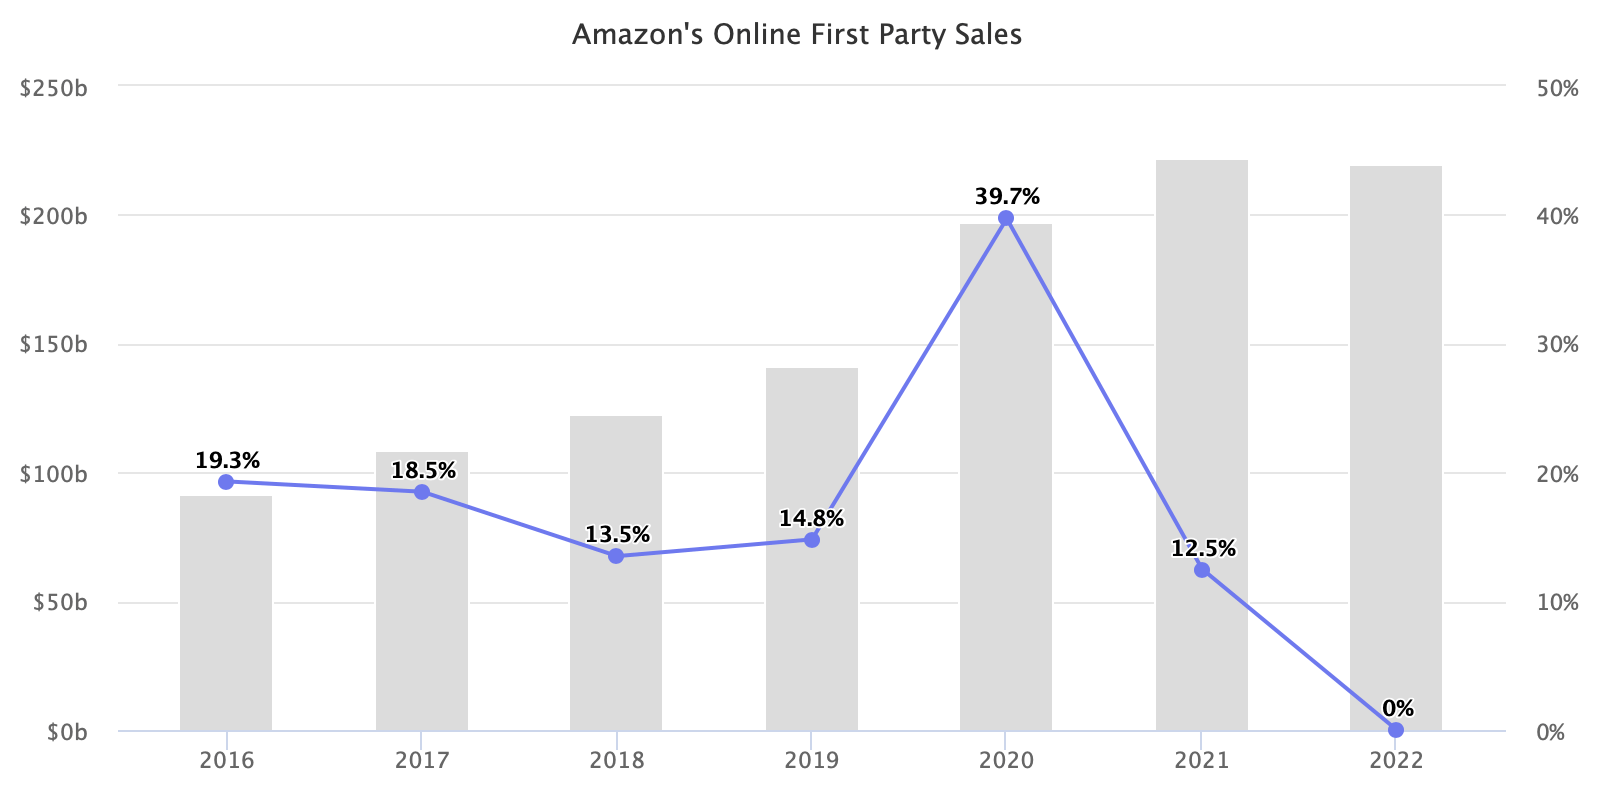 Amazon's Online First Party Sales